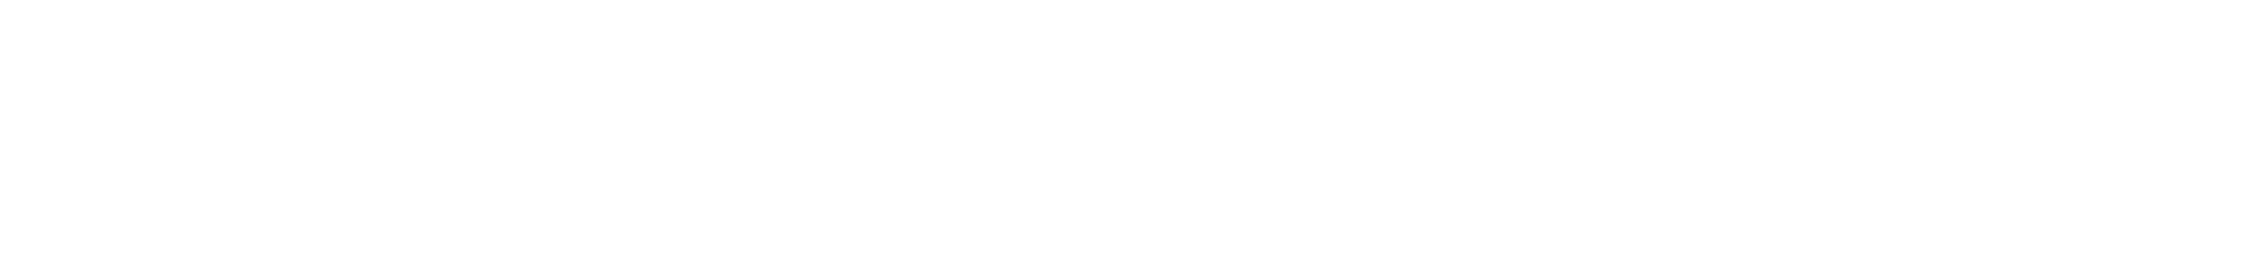 — high performance generator set range for marine containers —